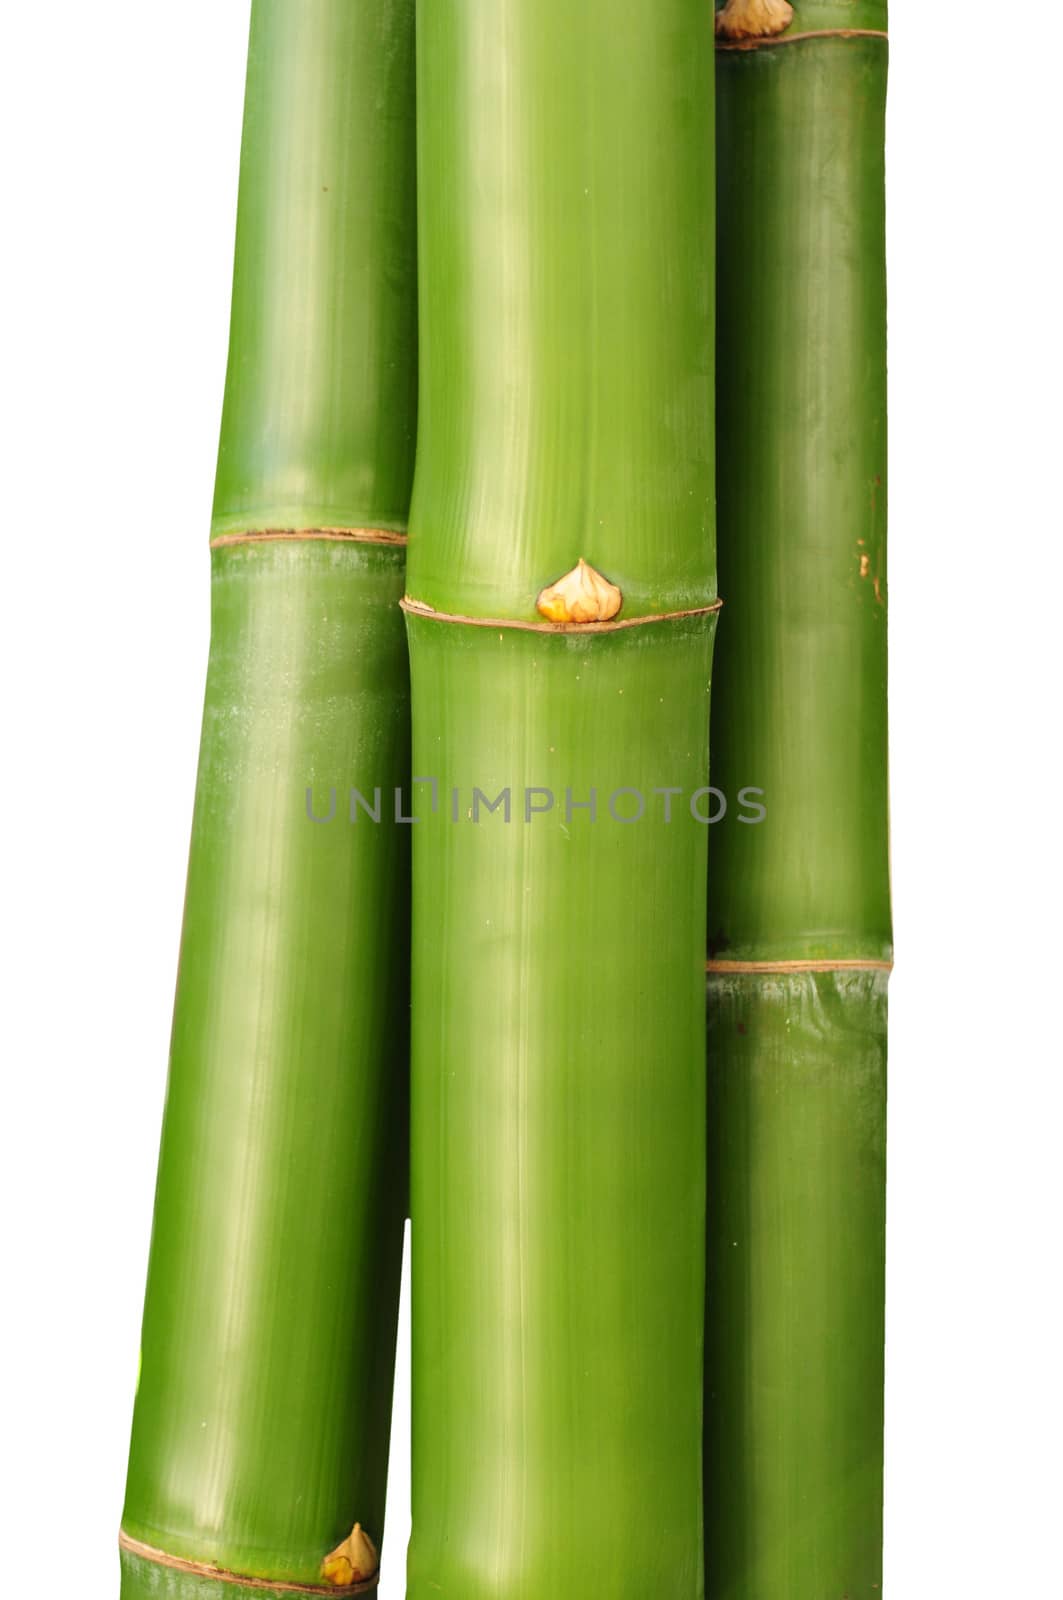 three bamboo stalks against white background by ftlaudgirl